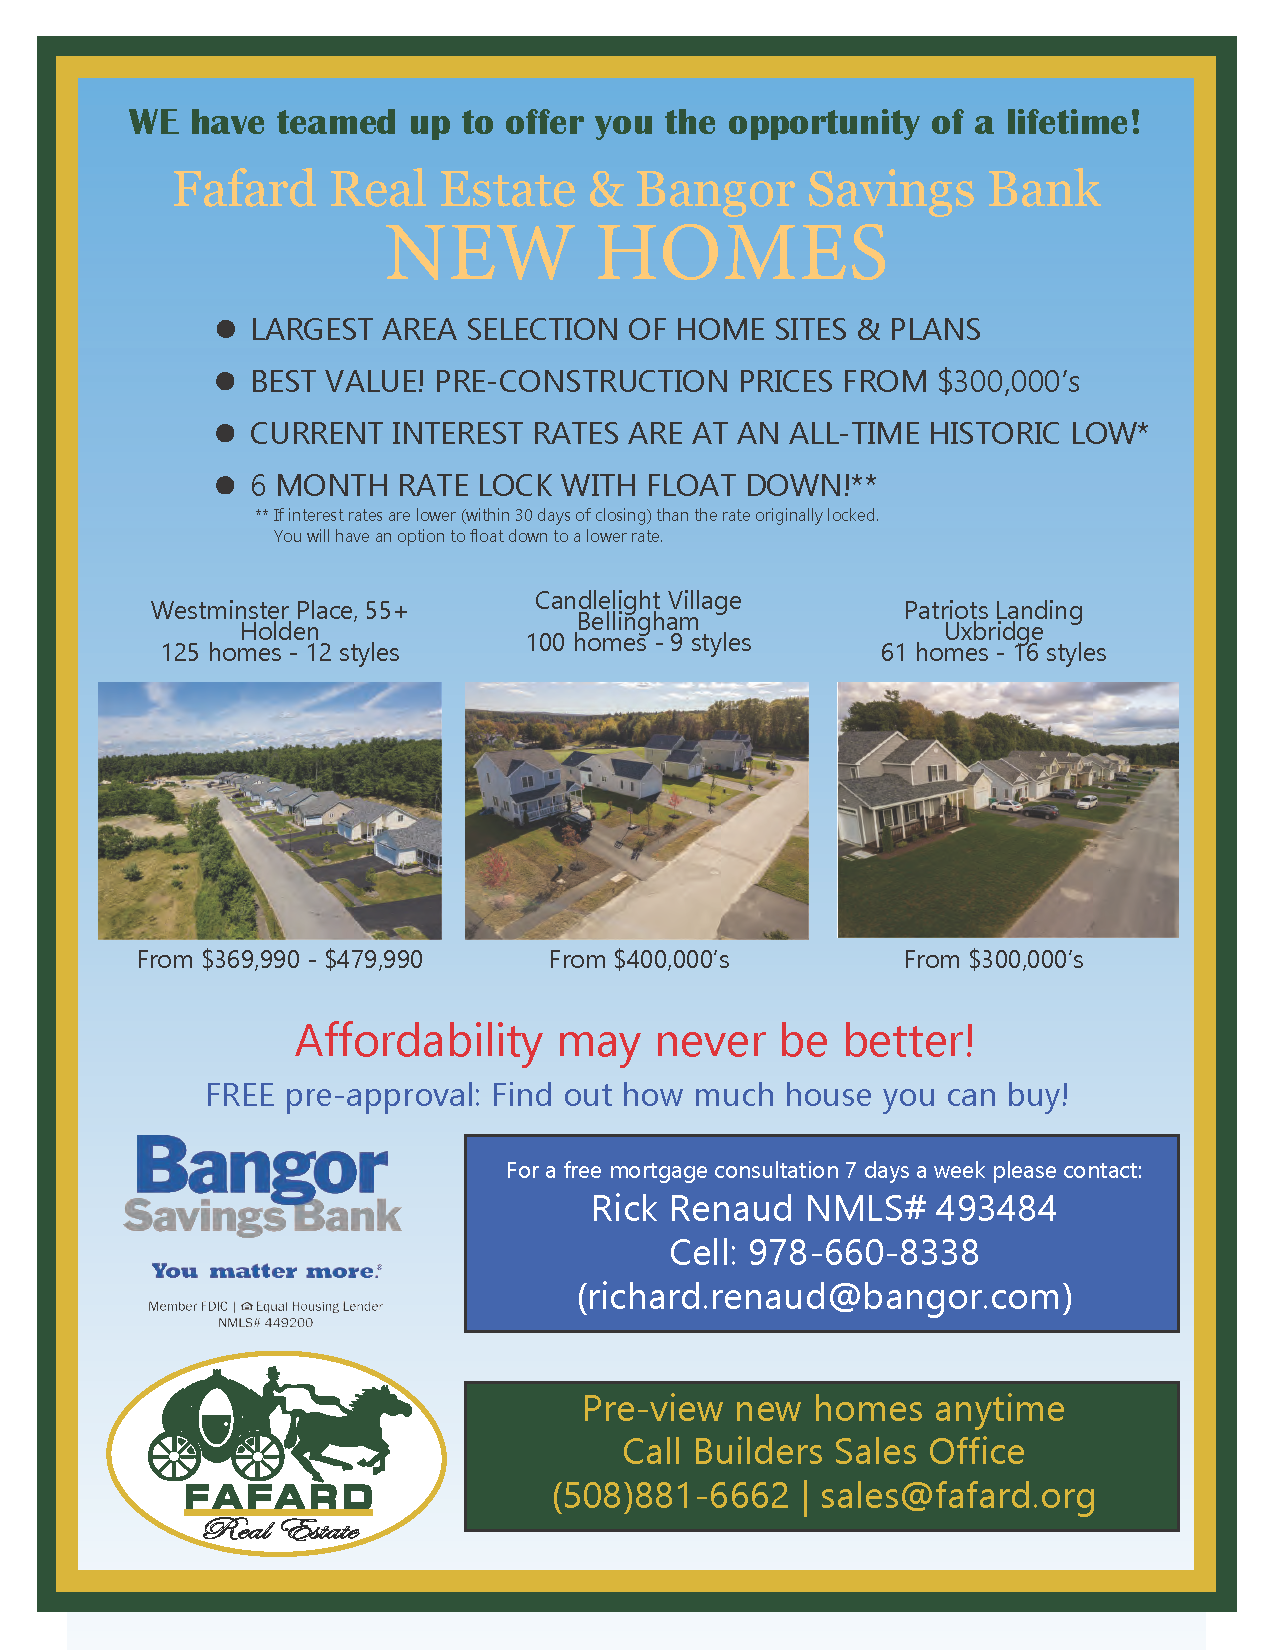 BOS/PROV/WORC area from $300,000's New Homes made even more affordable than area rentals!